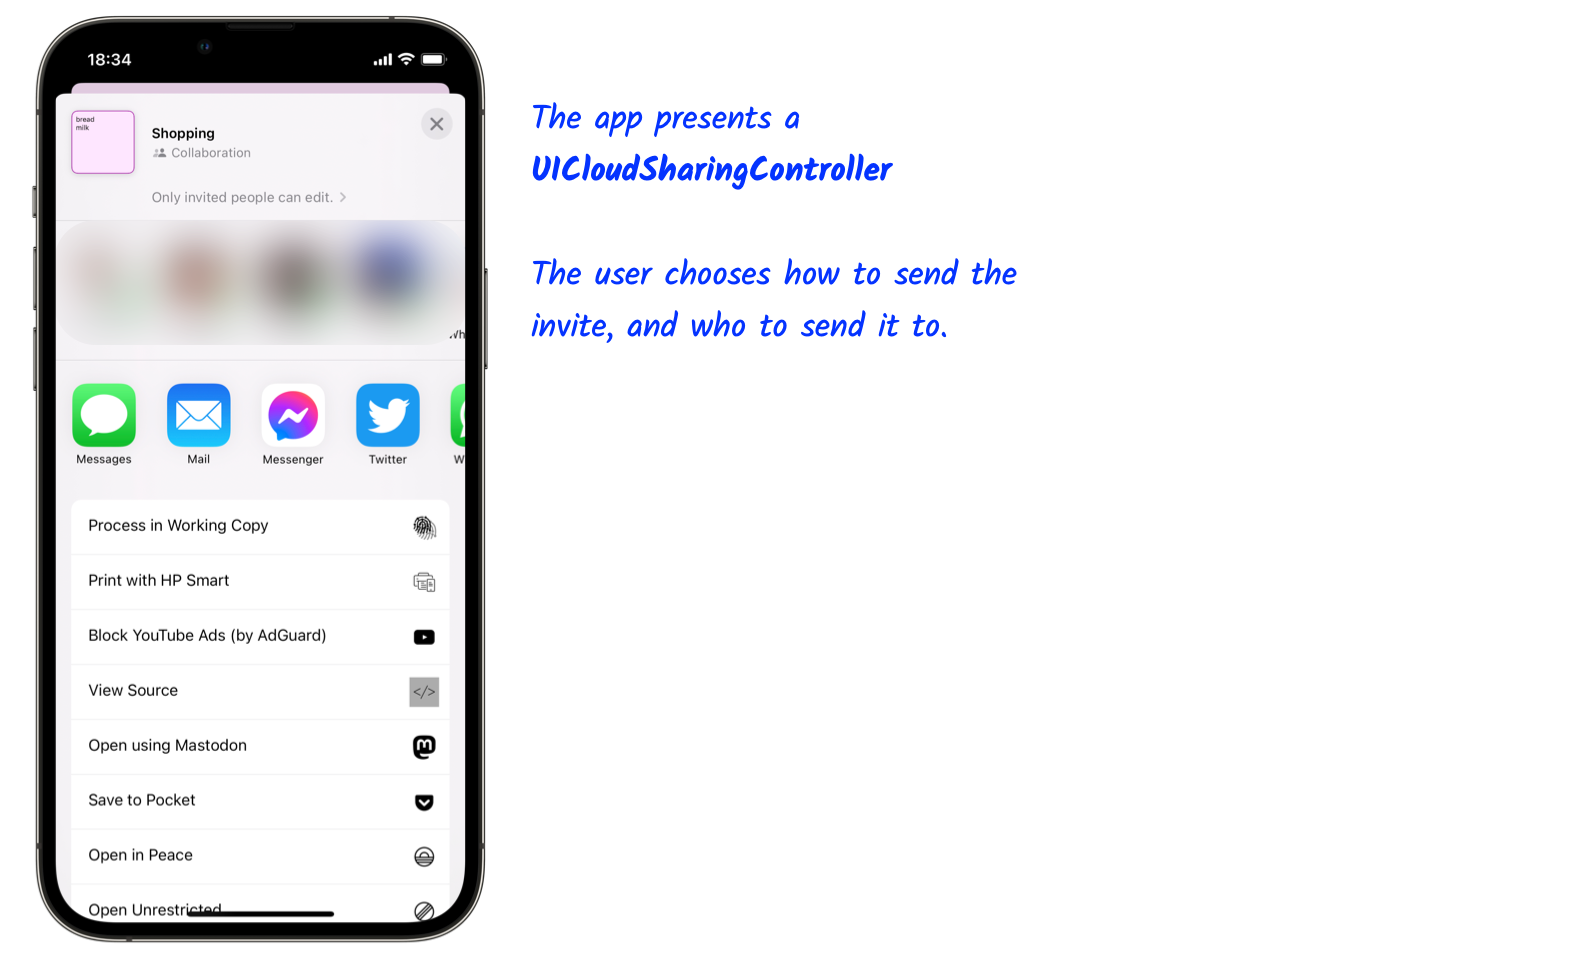 The app creates a UICloudSharingController to provide UI and coordinate